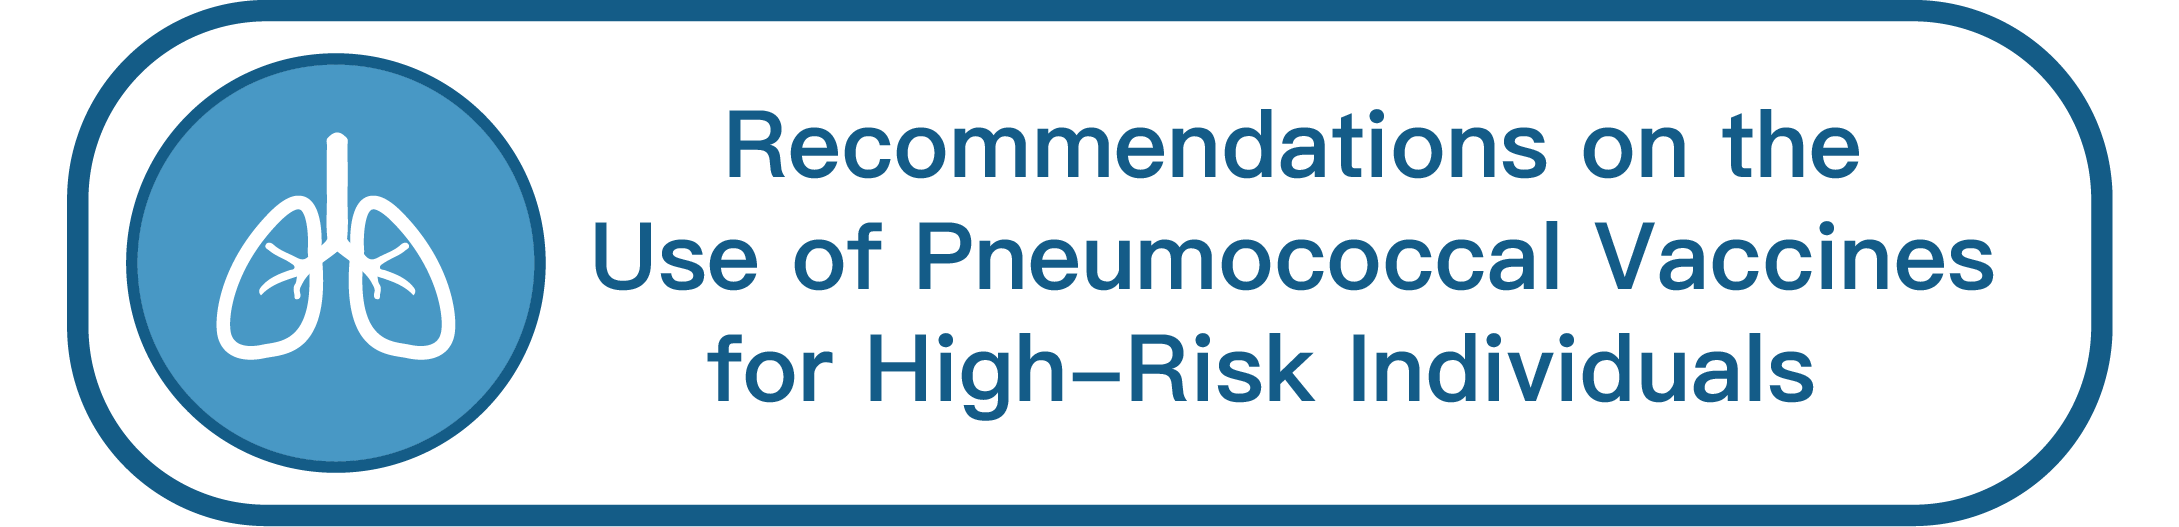 Recommendations on the Use of Pneumococcal Vaccines for High-Risk Individuals